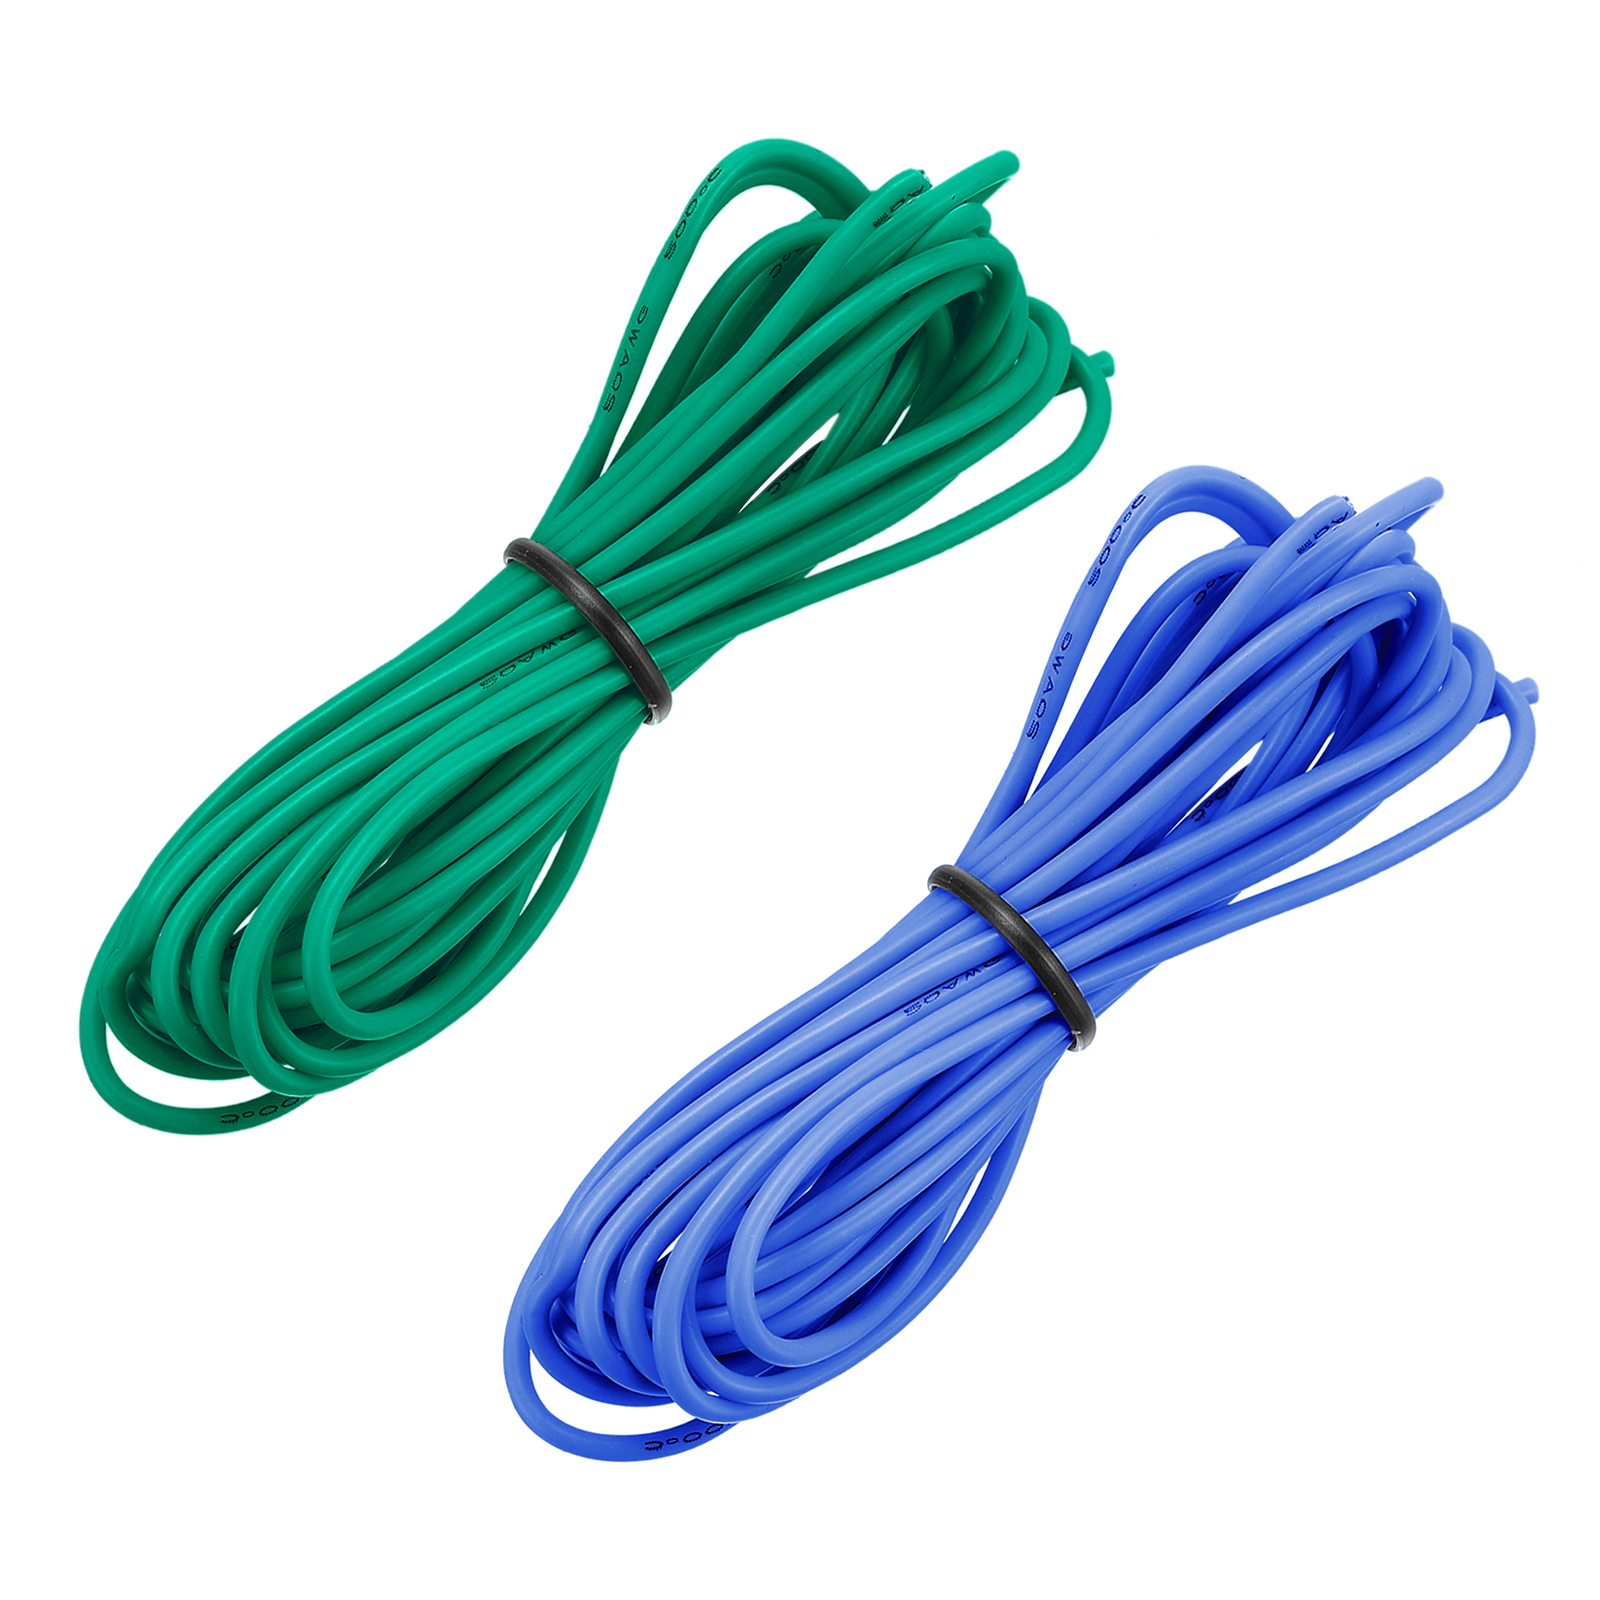 20 Gauge Silicone Wire 20AWG Stranded Wire Tinned Copper Wire High Temp Wire  Blue/Green 3.0m/10ft 2pcs 